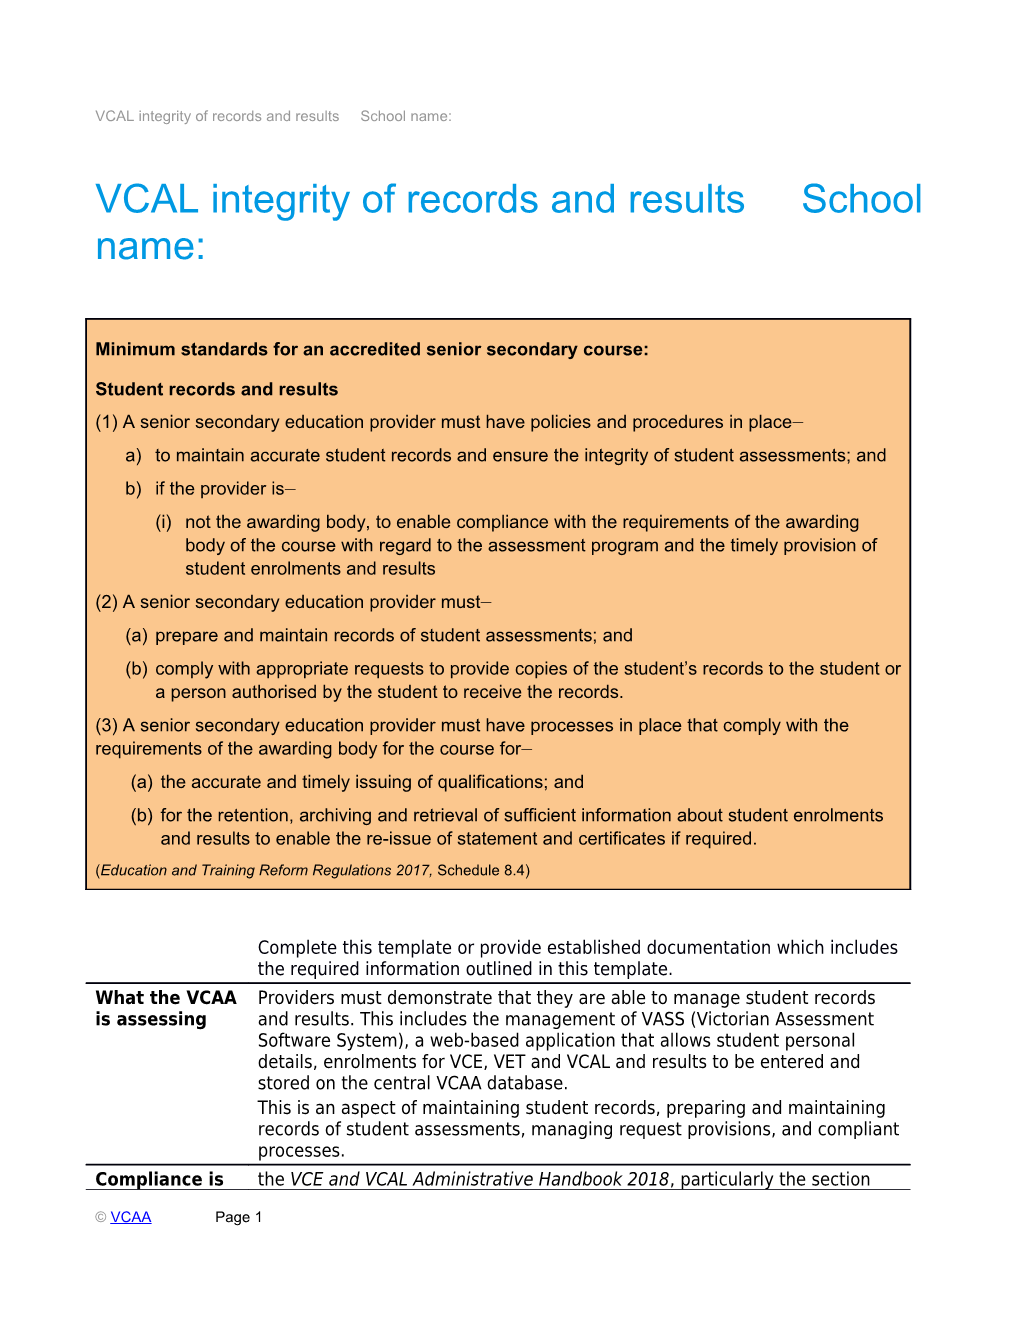 VCAL Integrity of Records and Results School Name